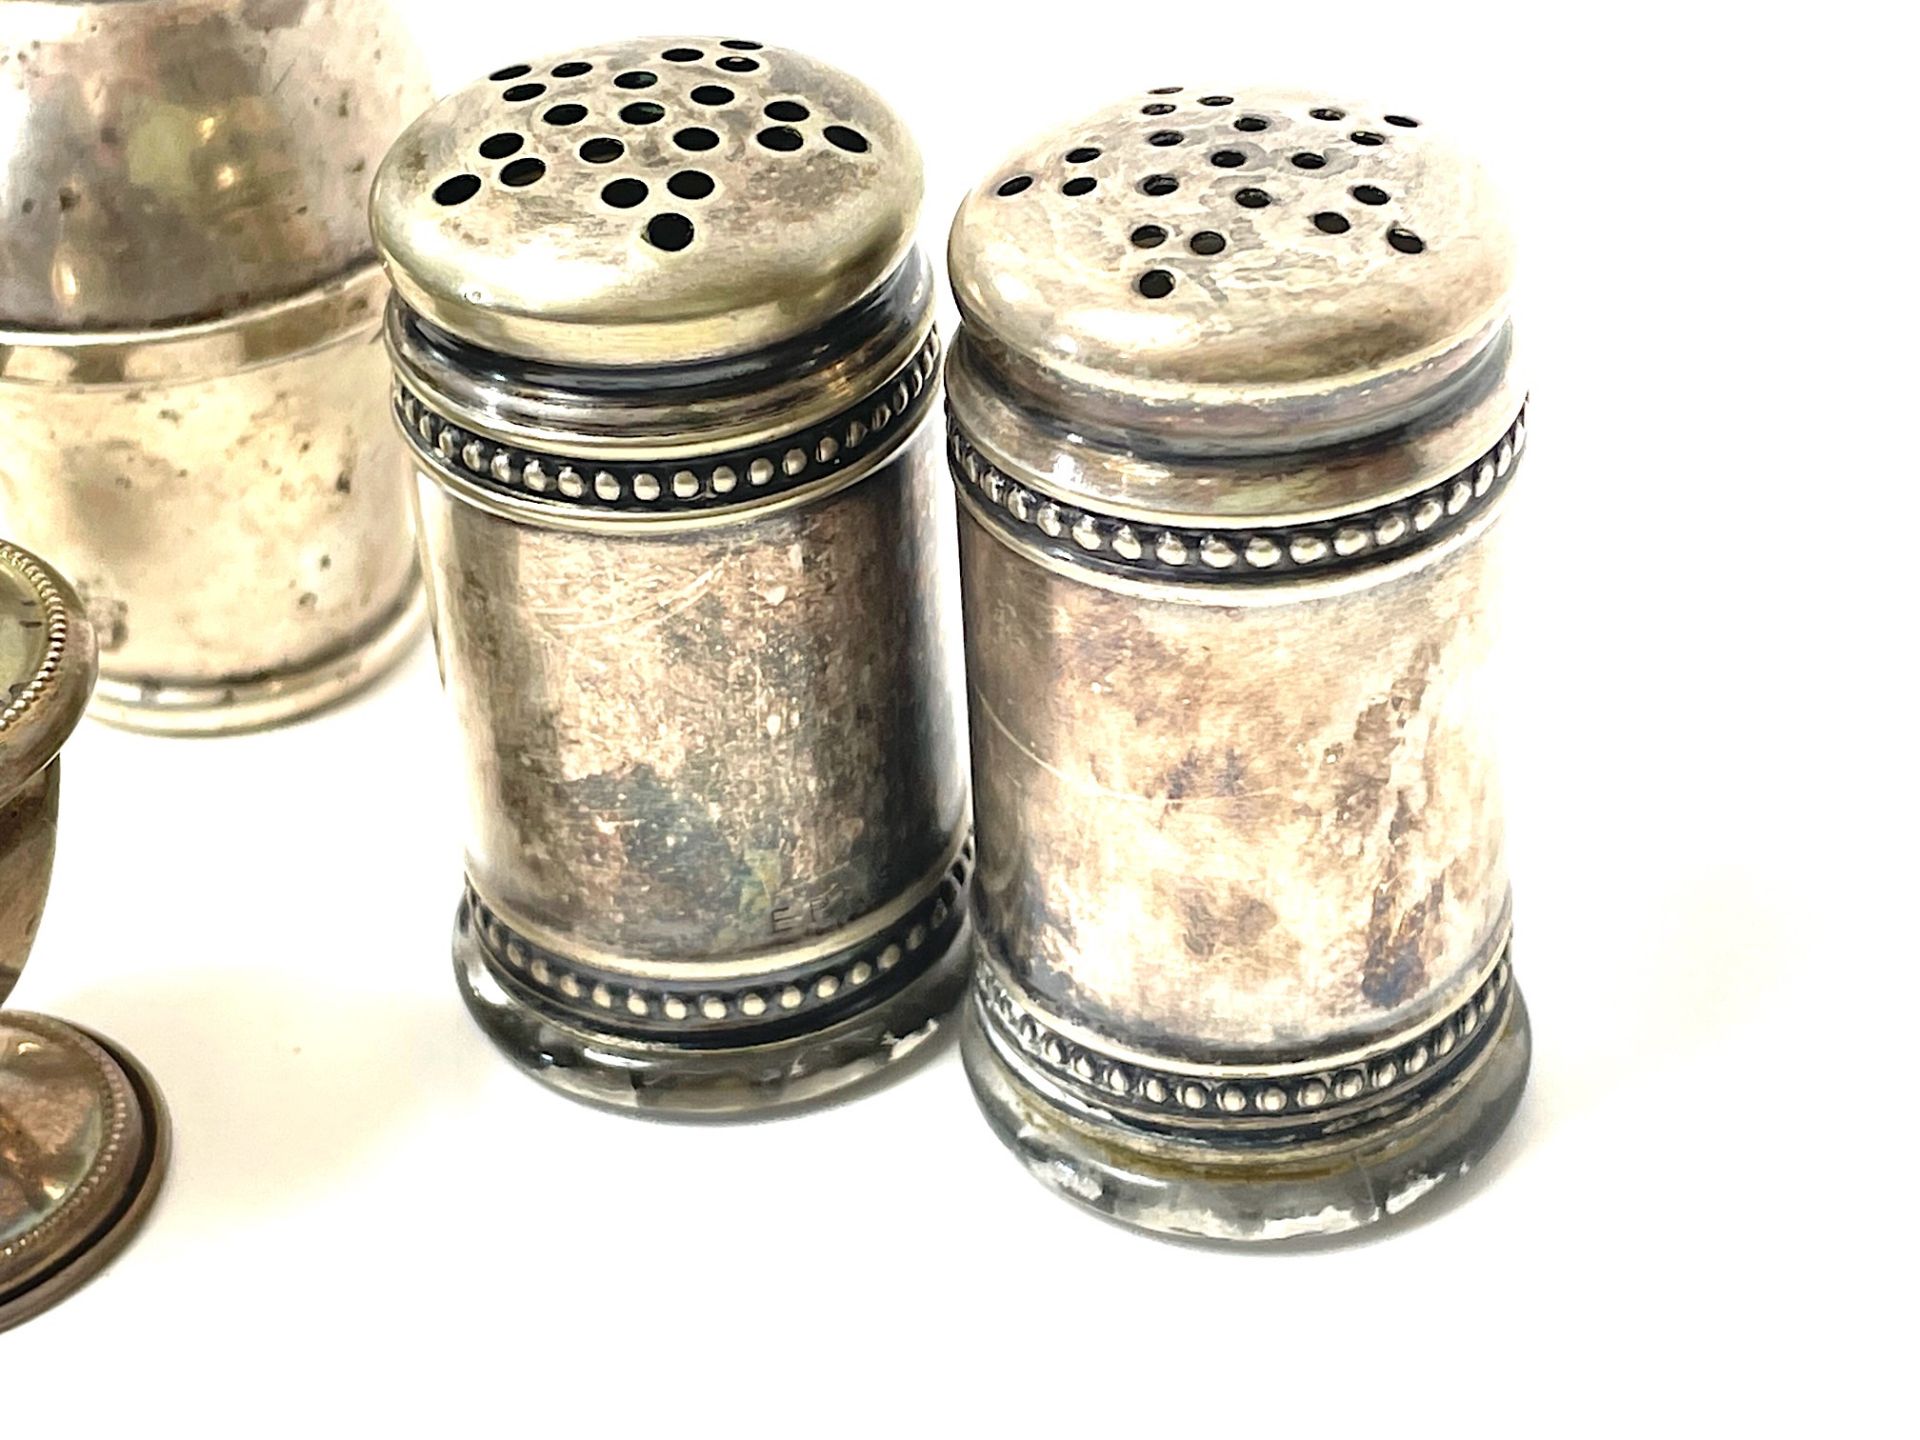 40 pairs of salt/pepper and spice shakers, - Image 3 of 88